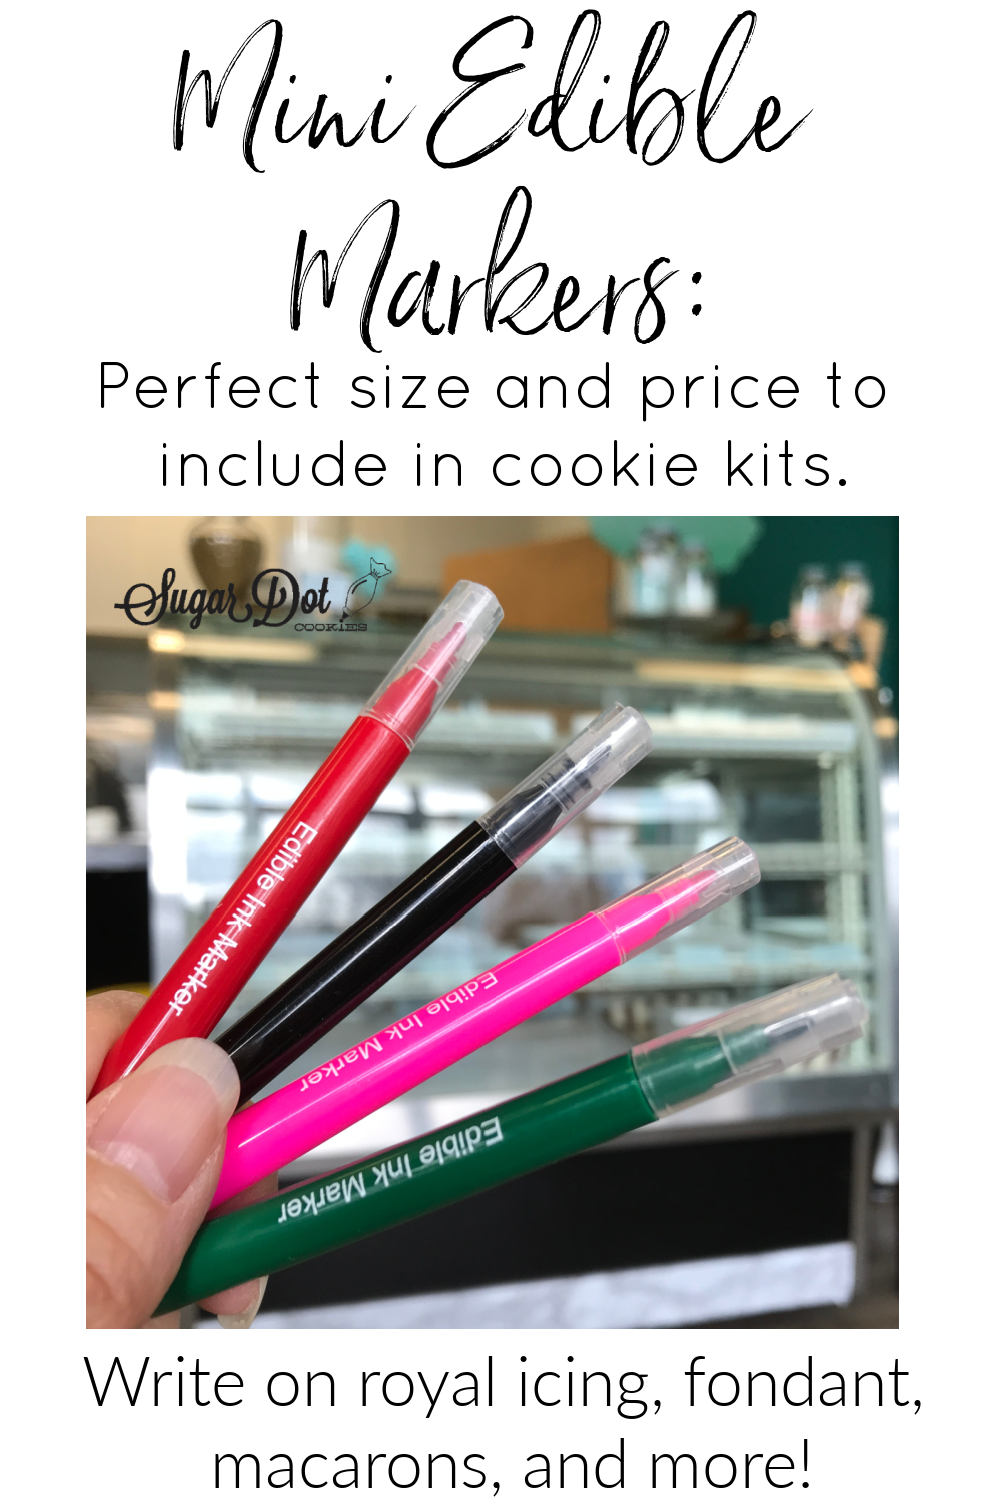 Edible Markers Shipped Nationwide